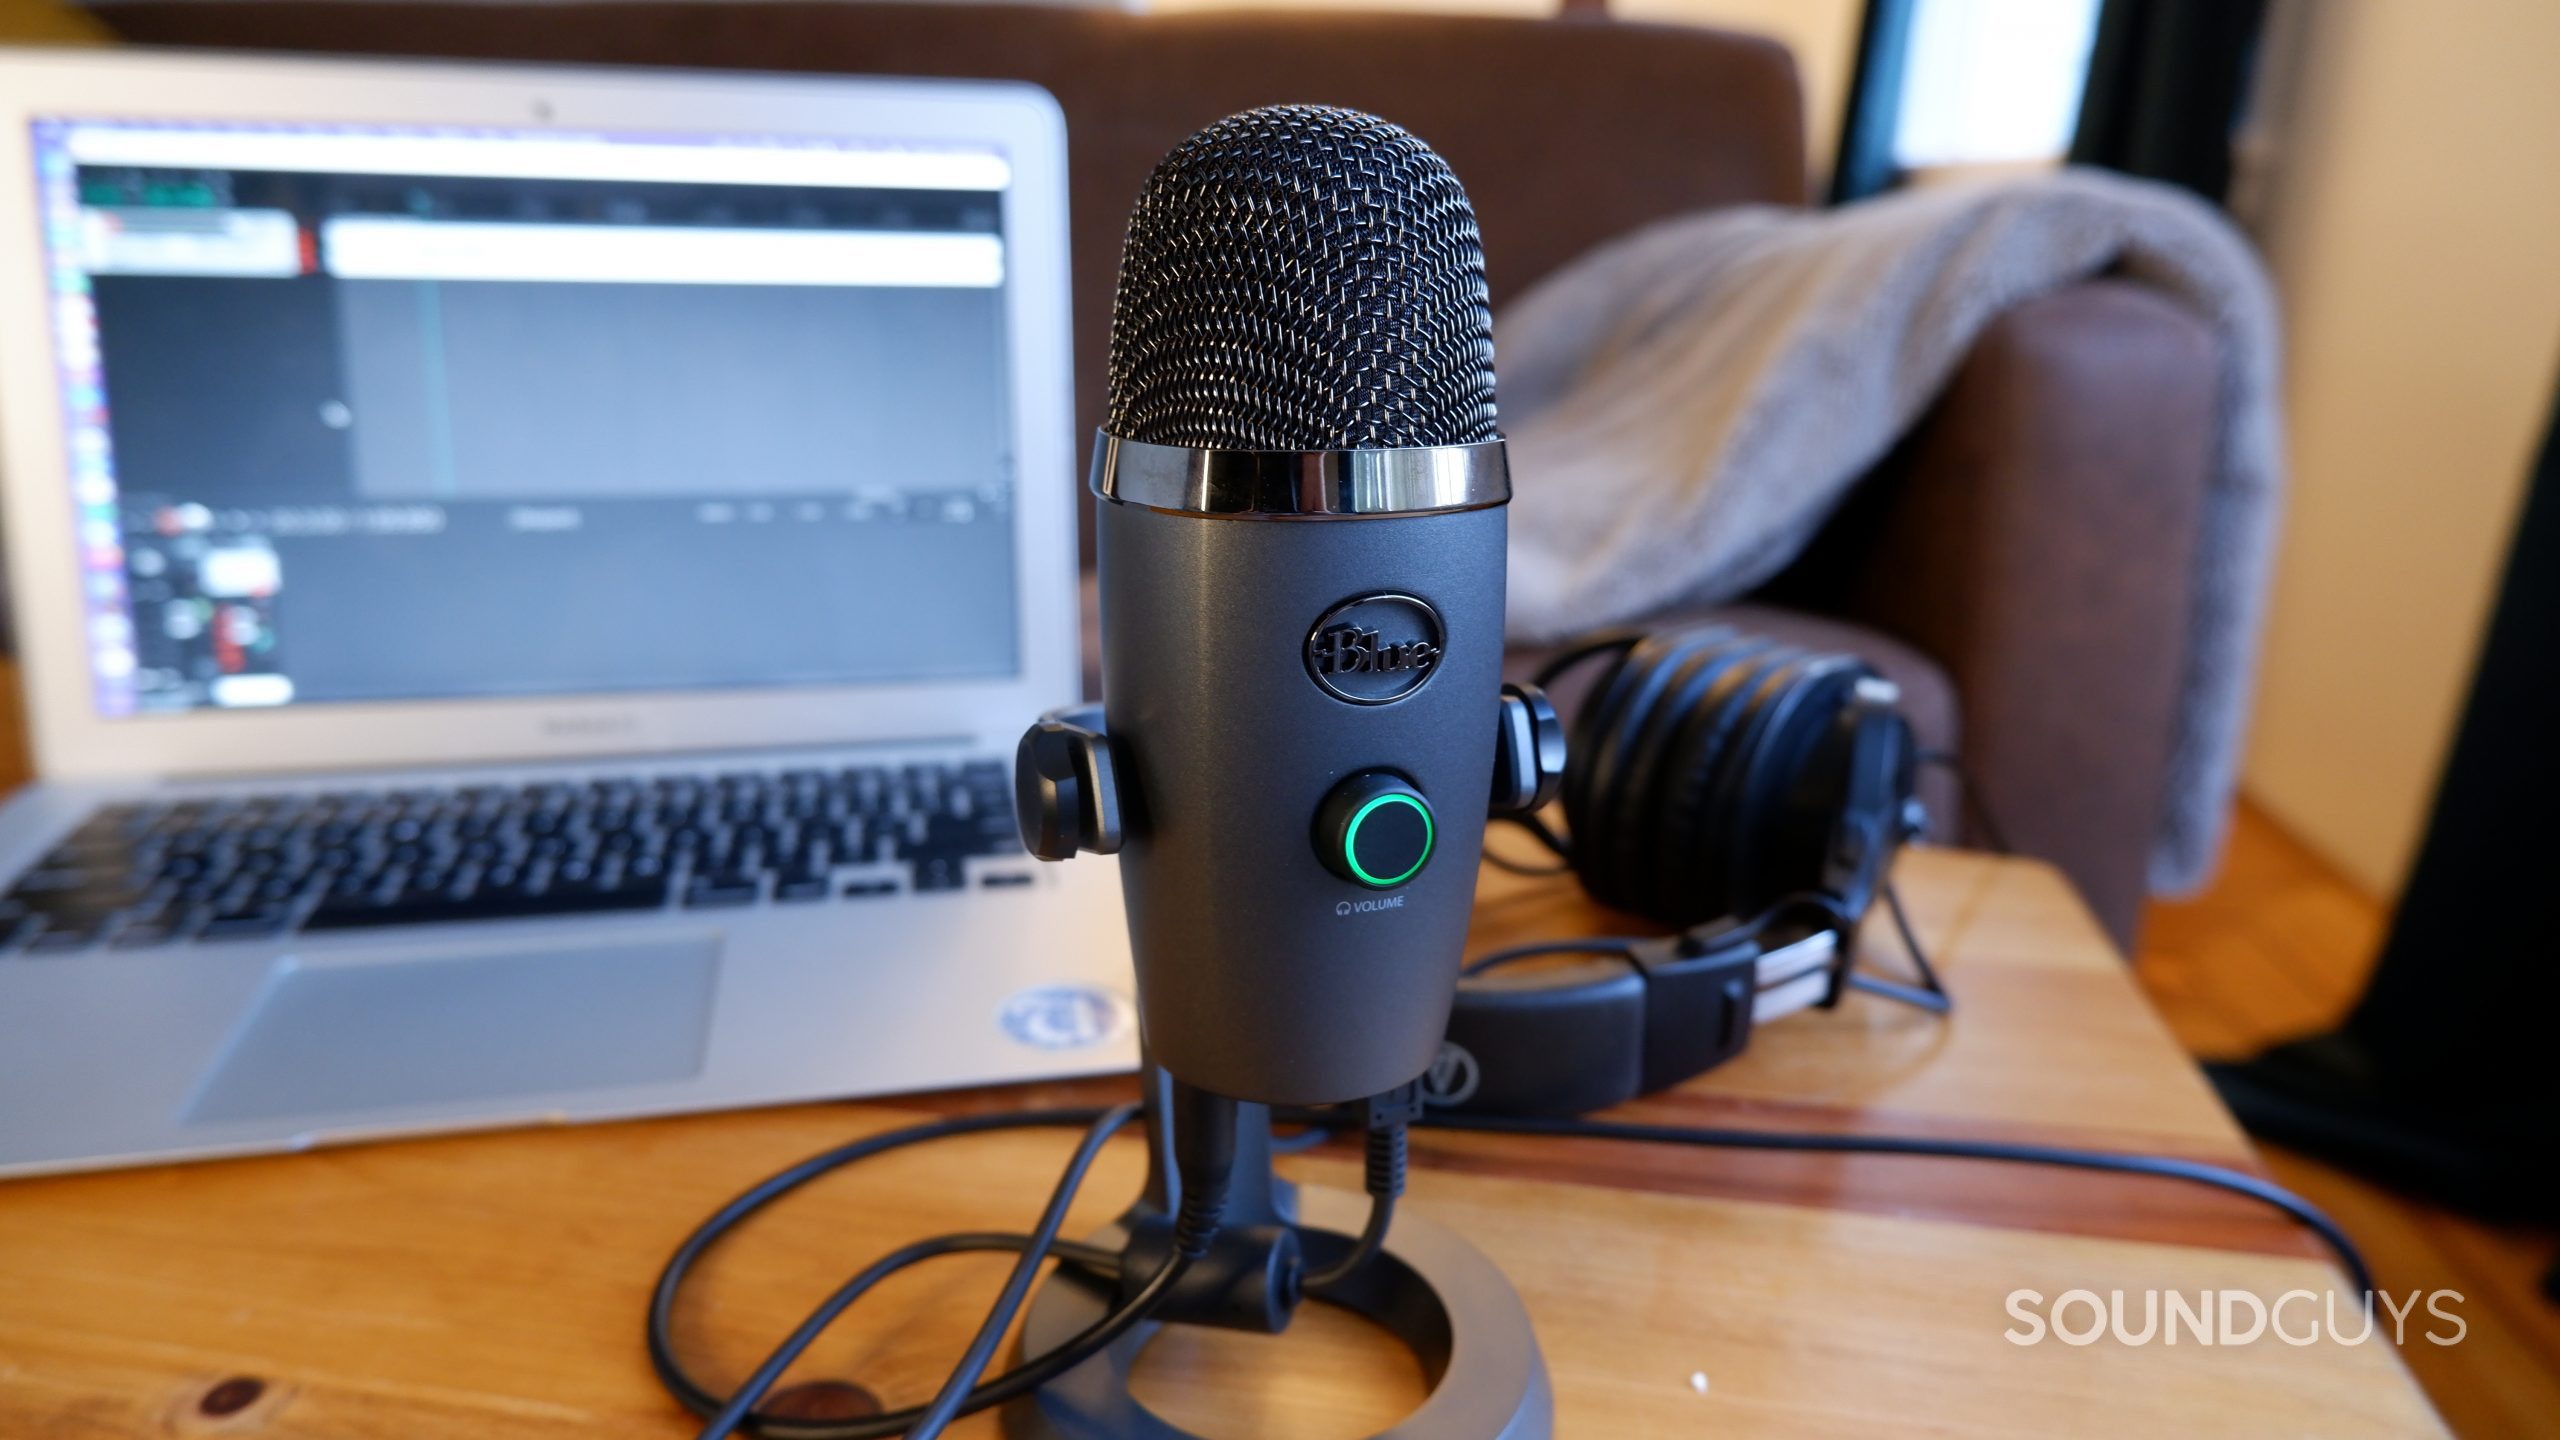 Blue Yeti Nano microphone sitting on a wooden table in front of a laptop and a pair of headphones.